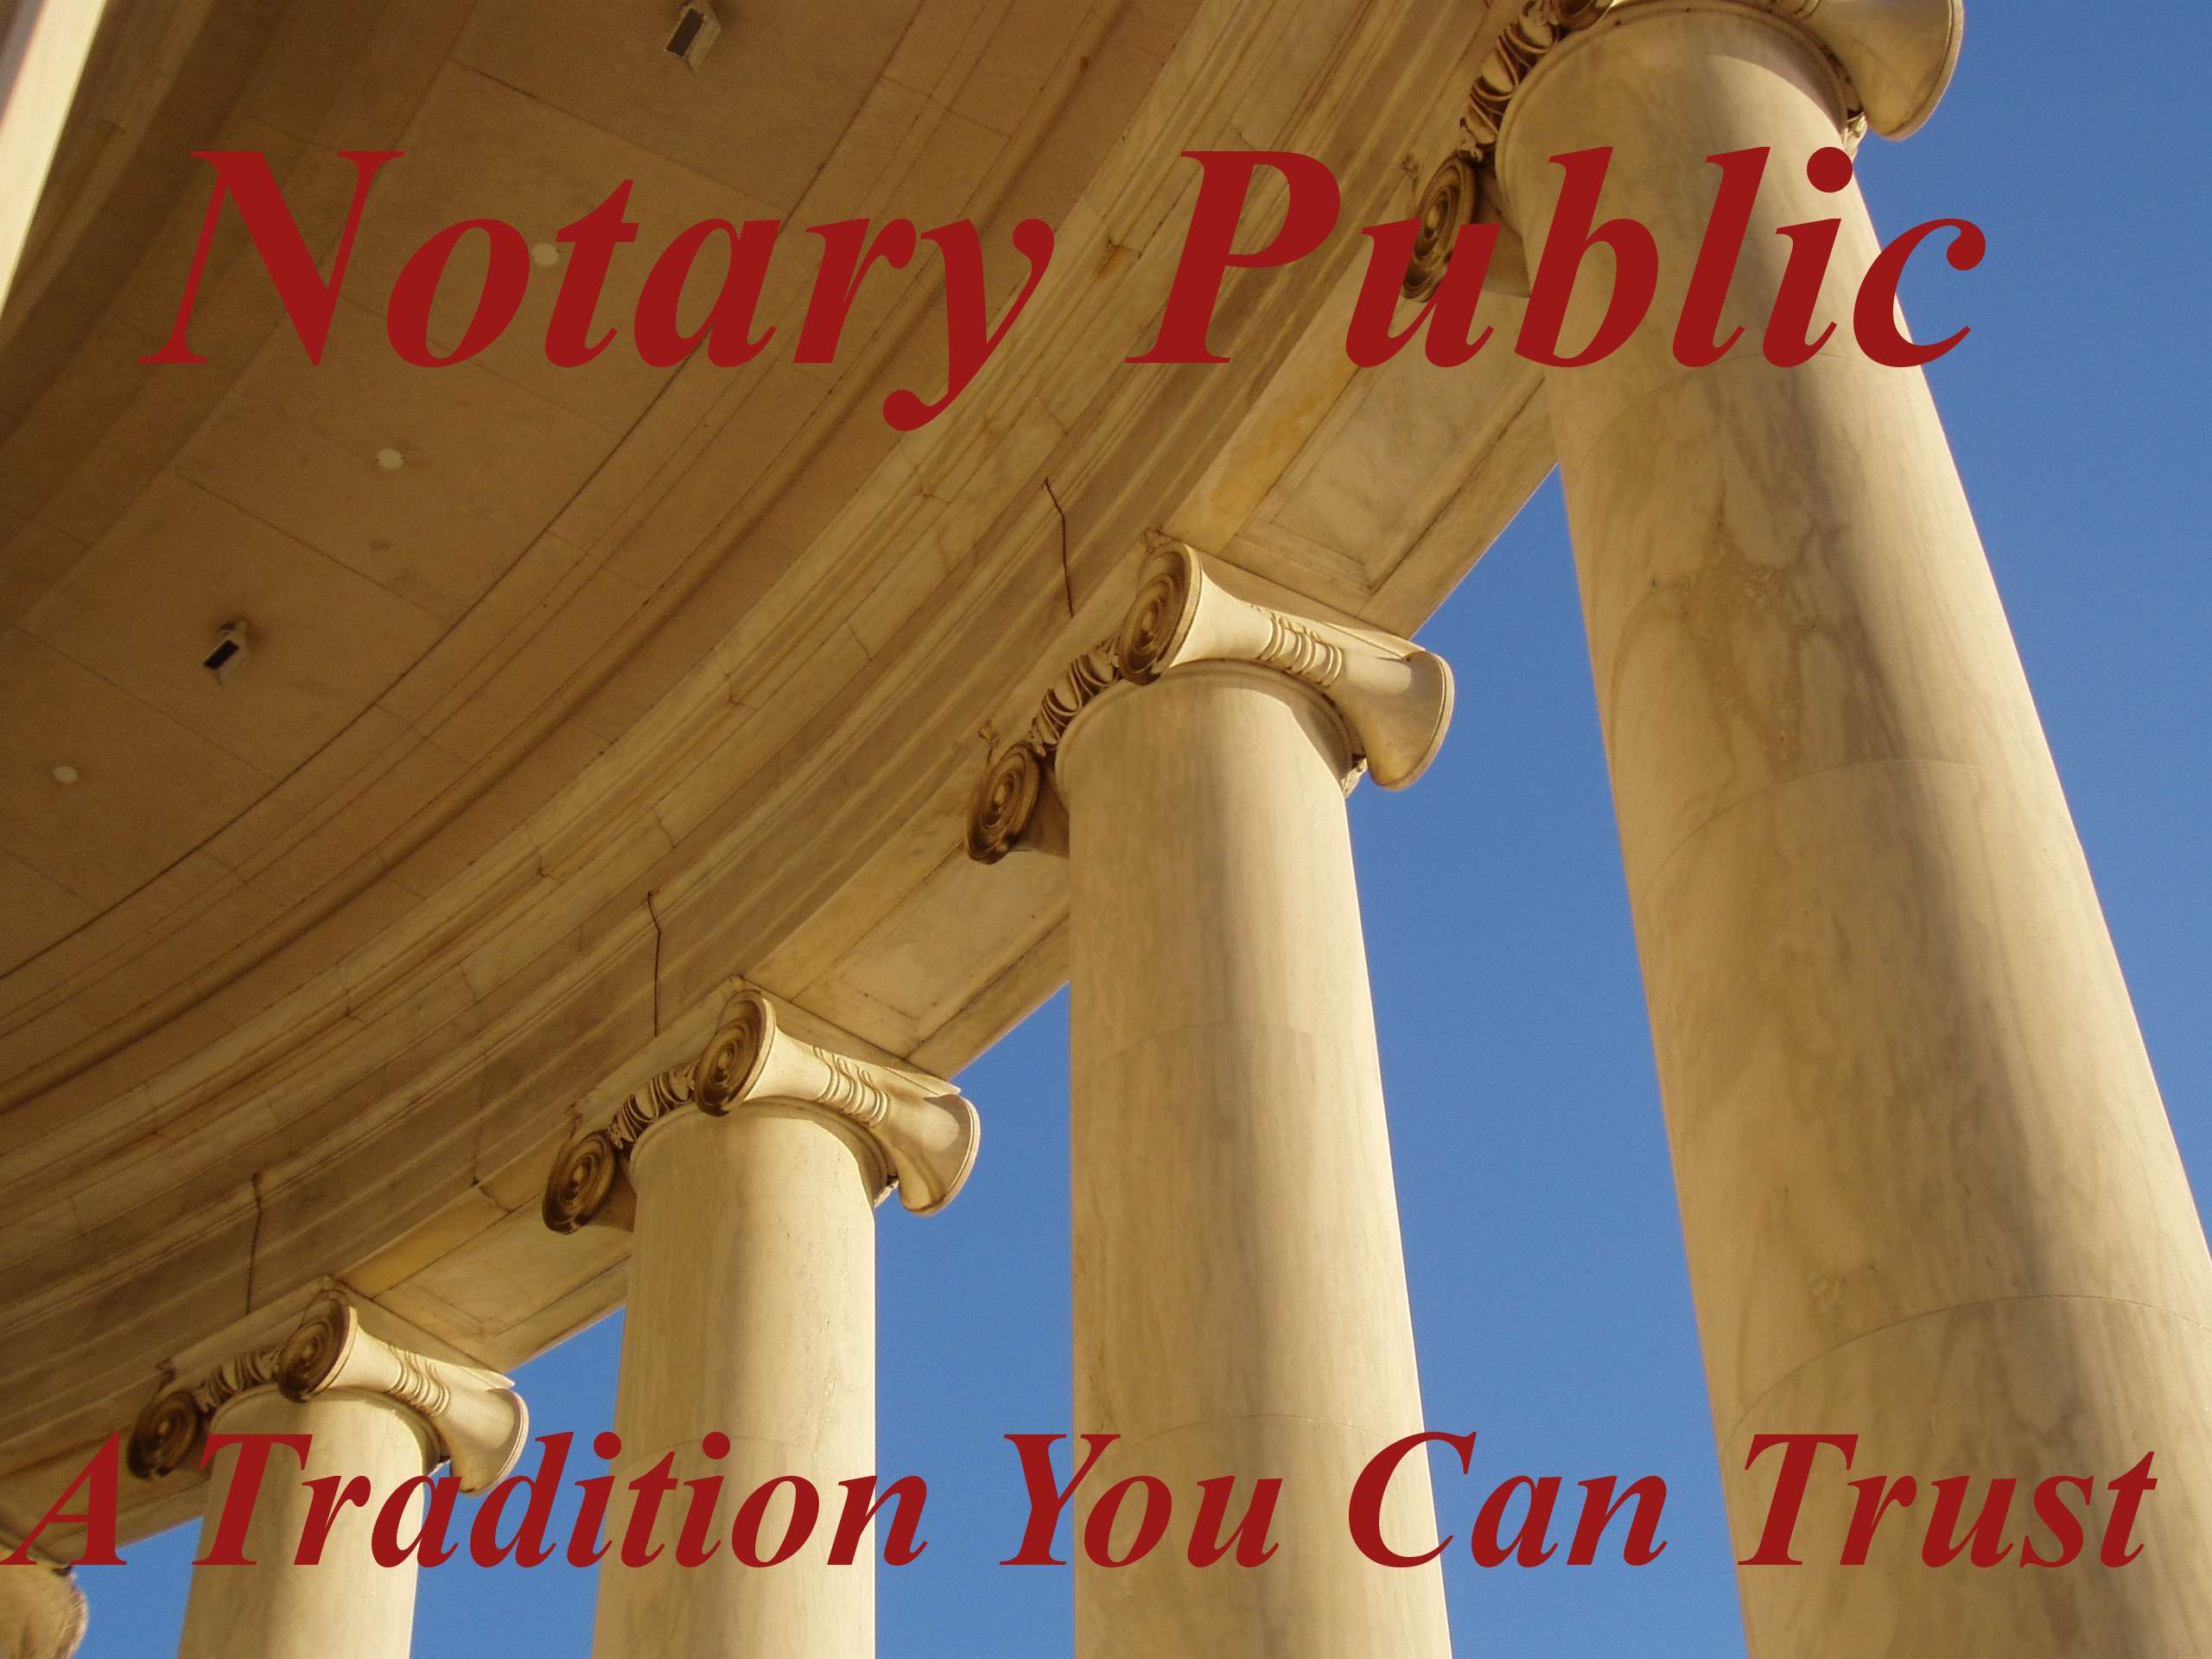 Notary Services 6 Days A Week!